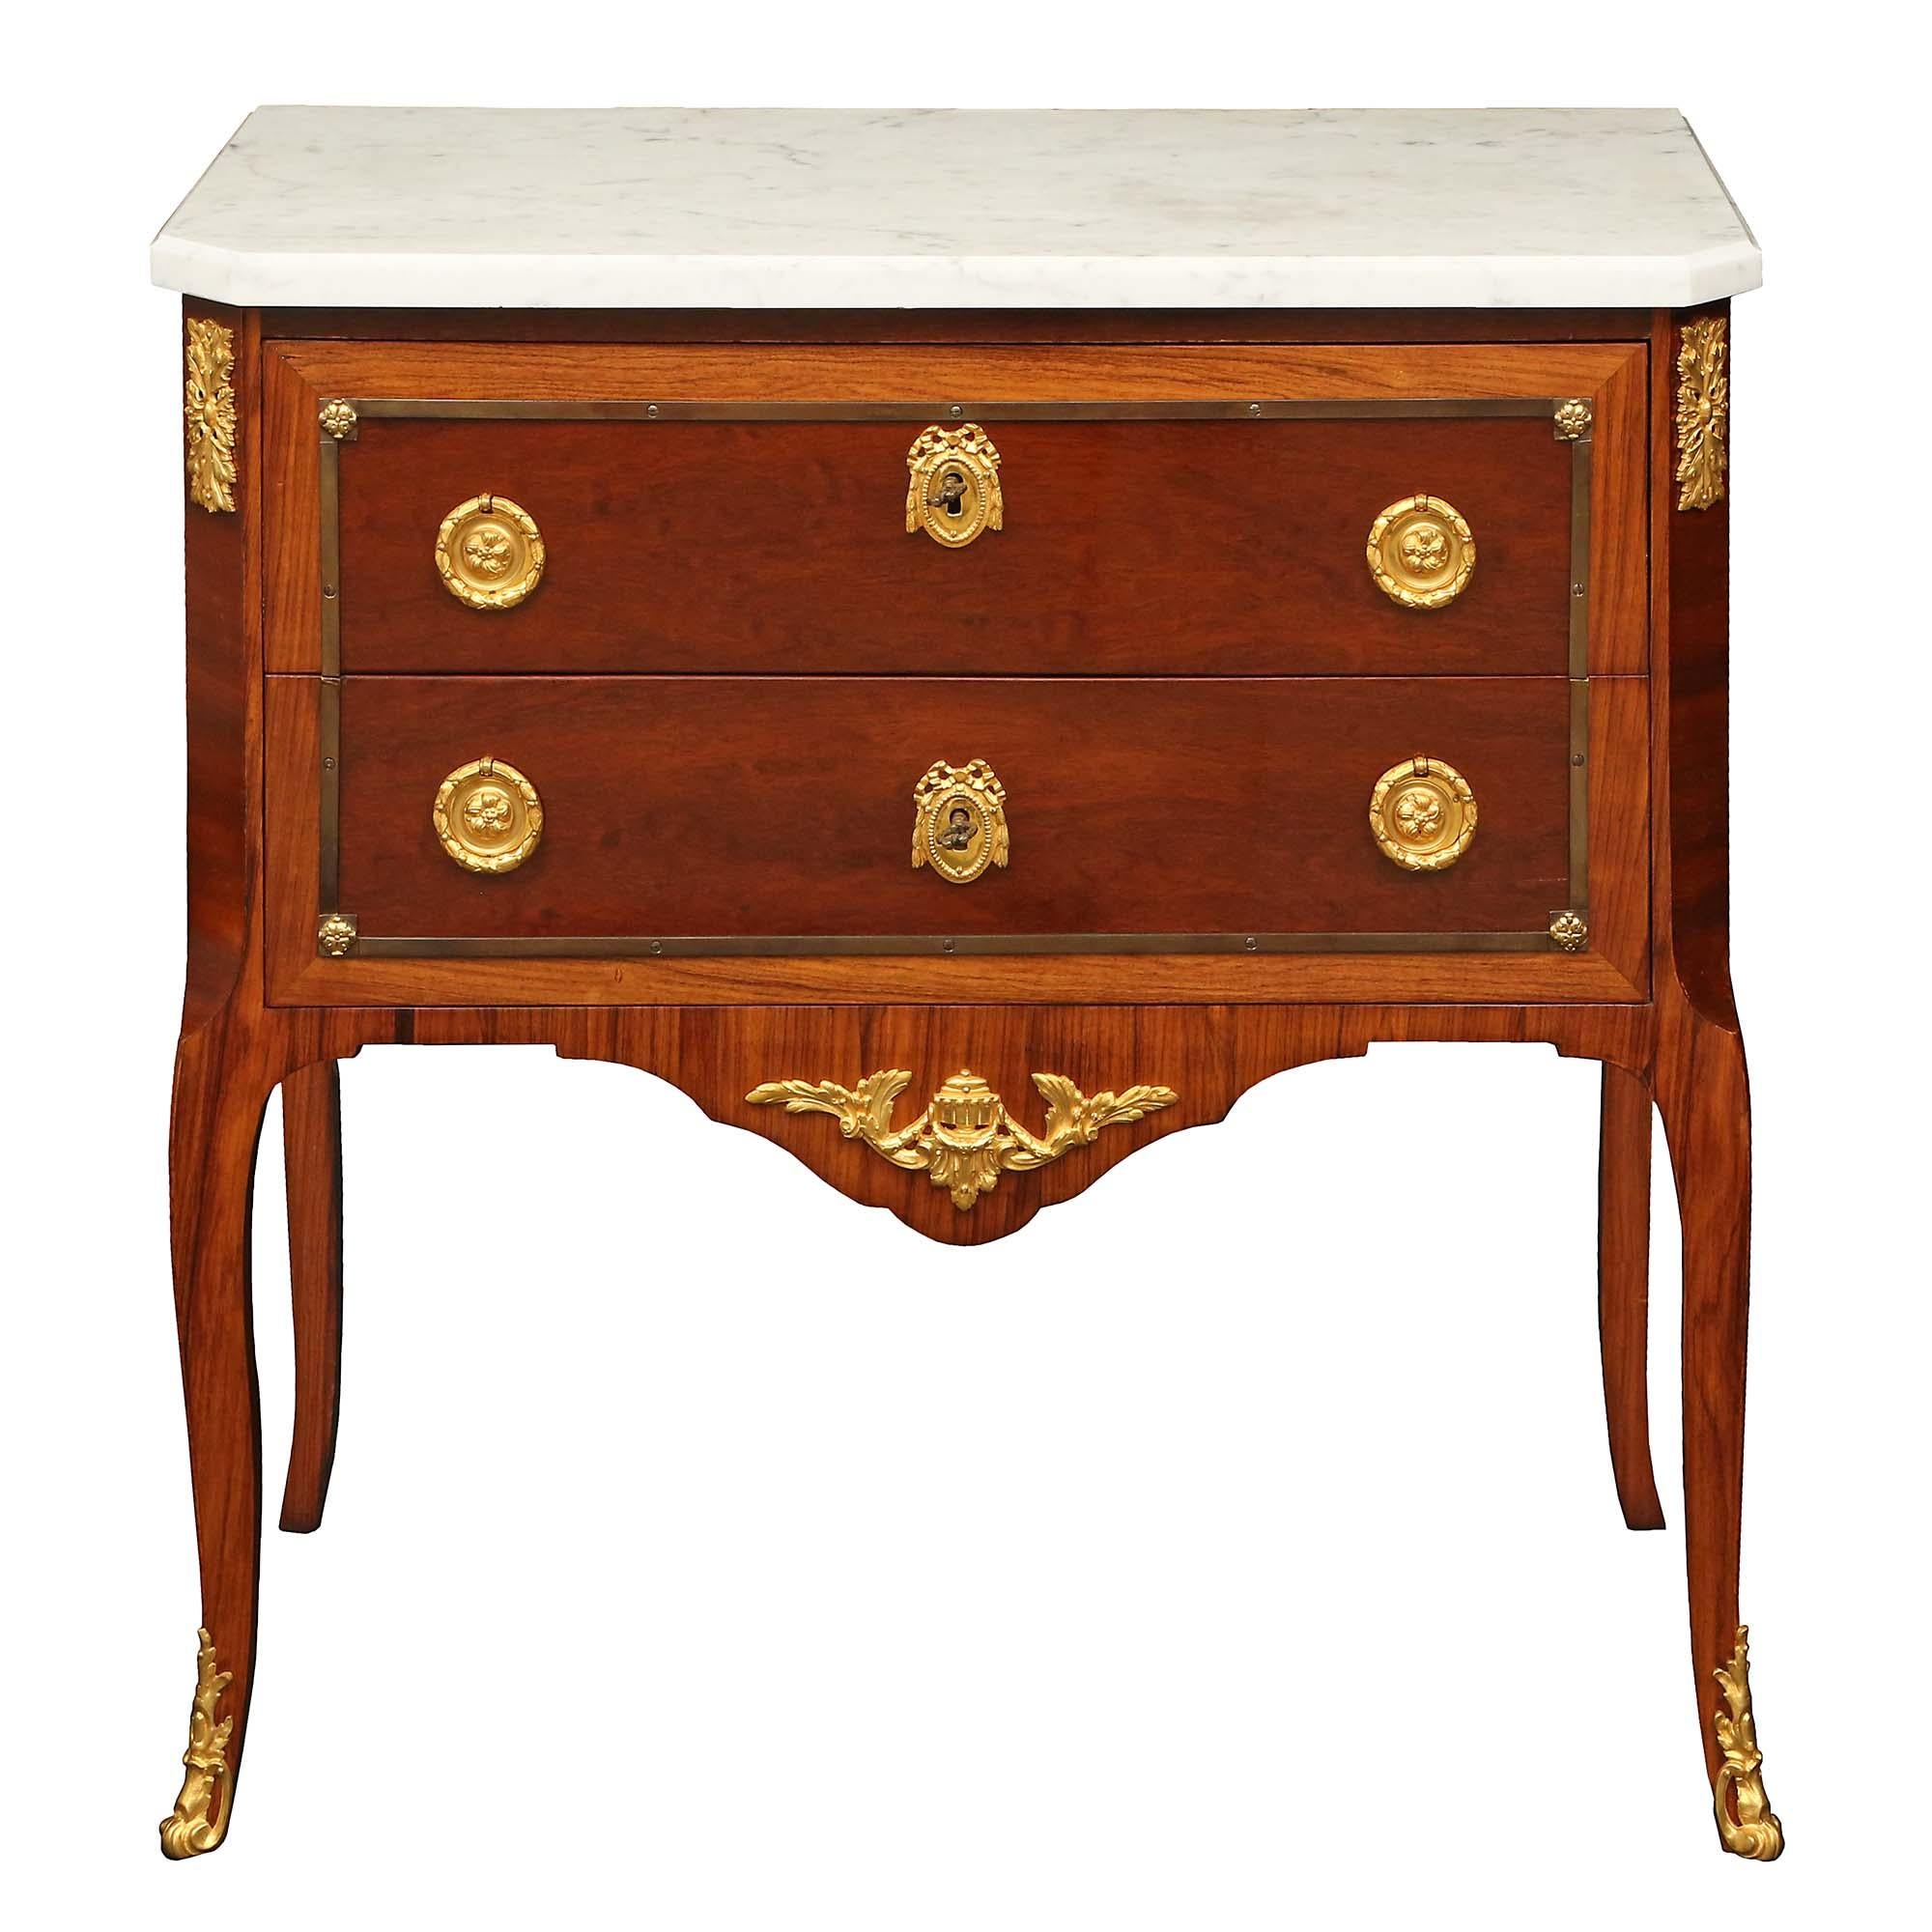 French 19th Century Transitional Style Mahogany and Ormolu Commode In Good Condition For Sale In West Palm Beach, FL